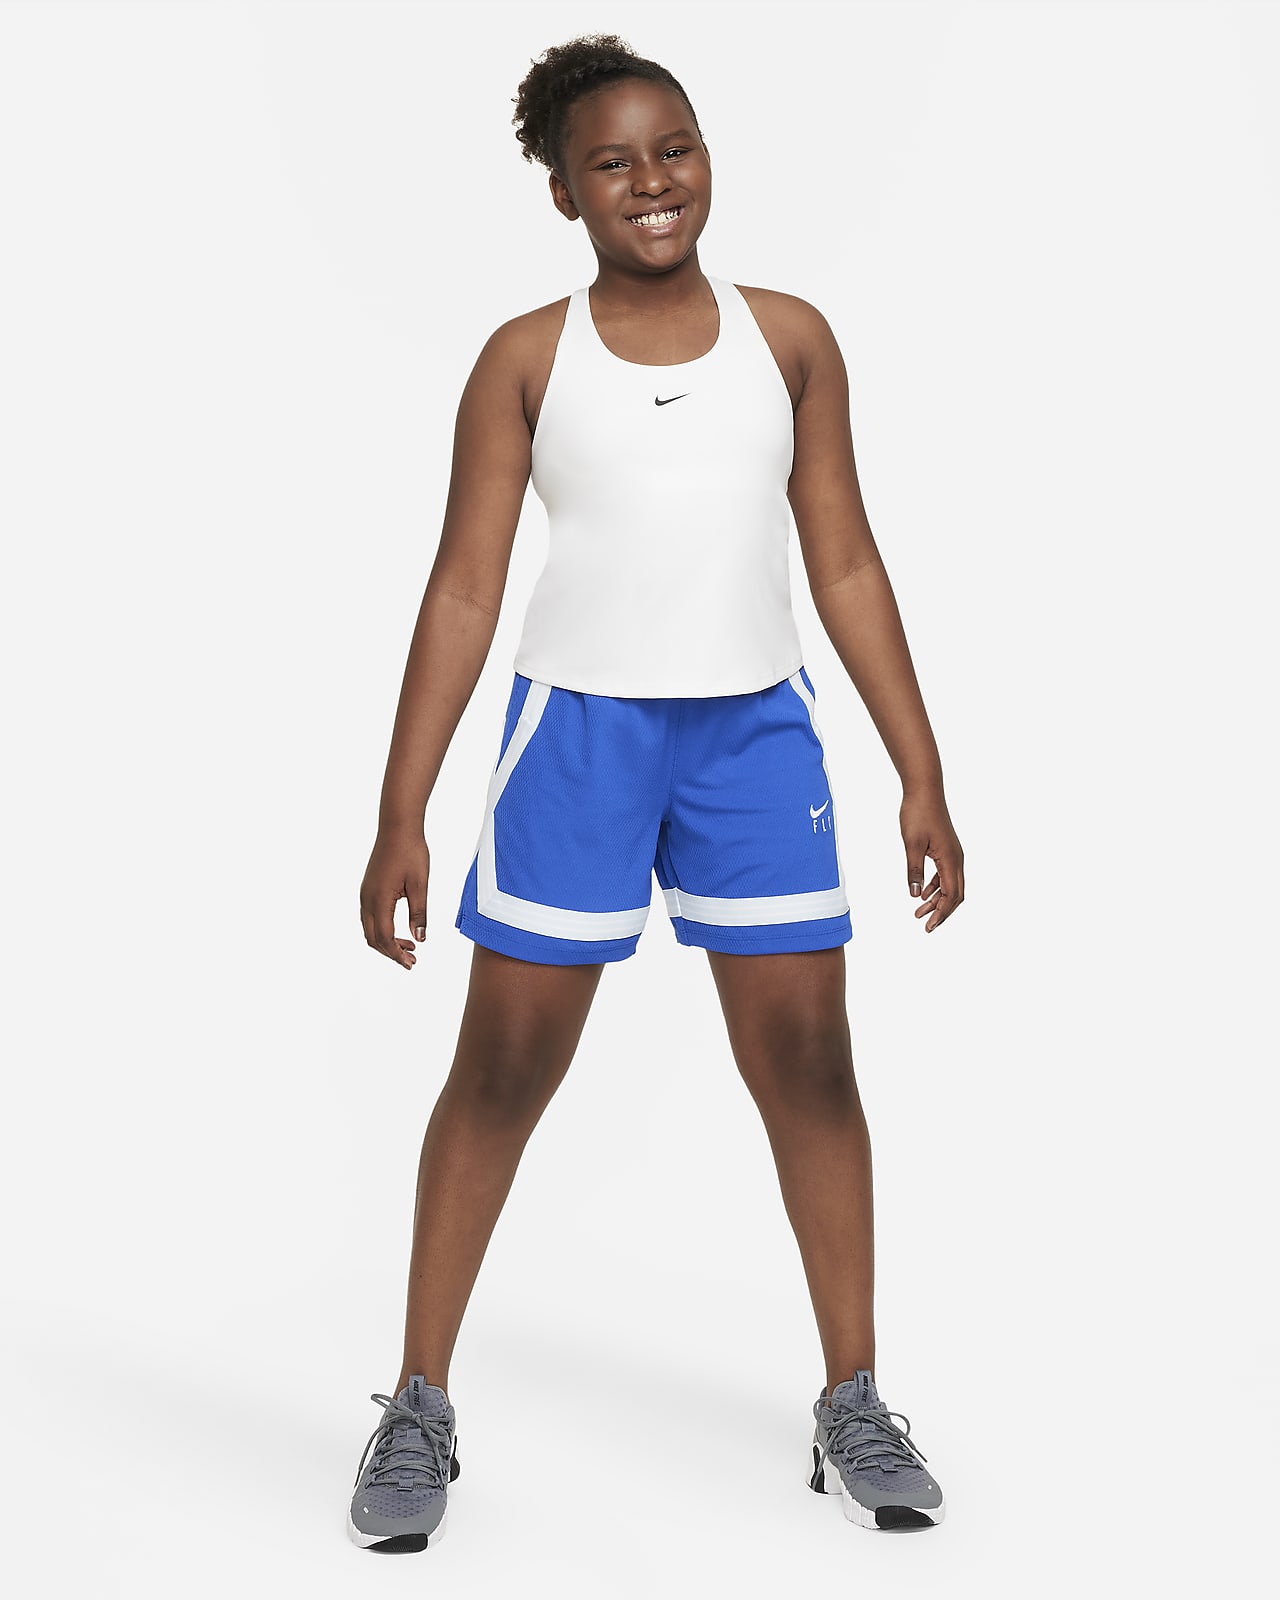 Nike Dri-FIT Indy Big Kids' (Girls') Sports Bra (Extended Size) in